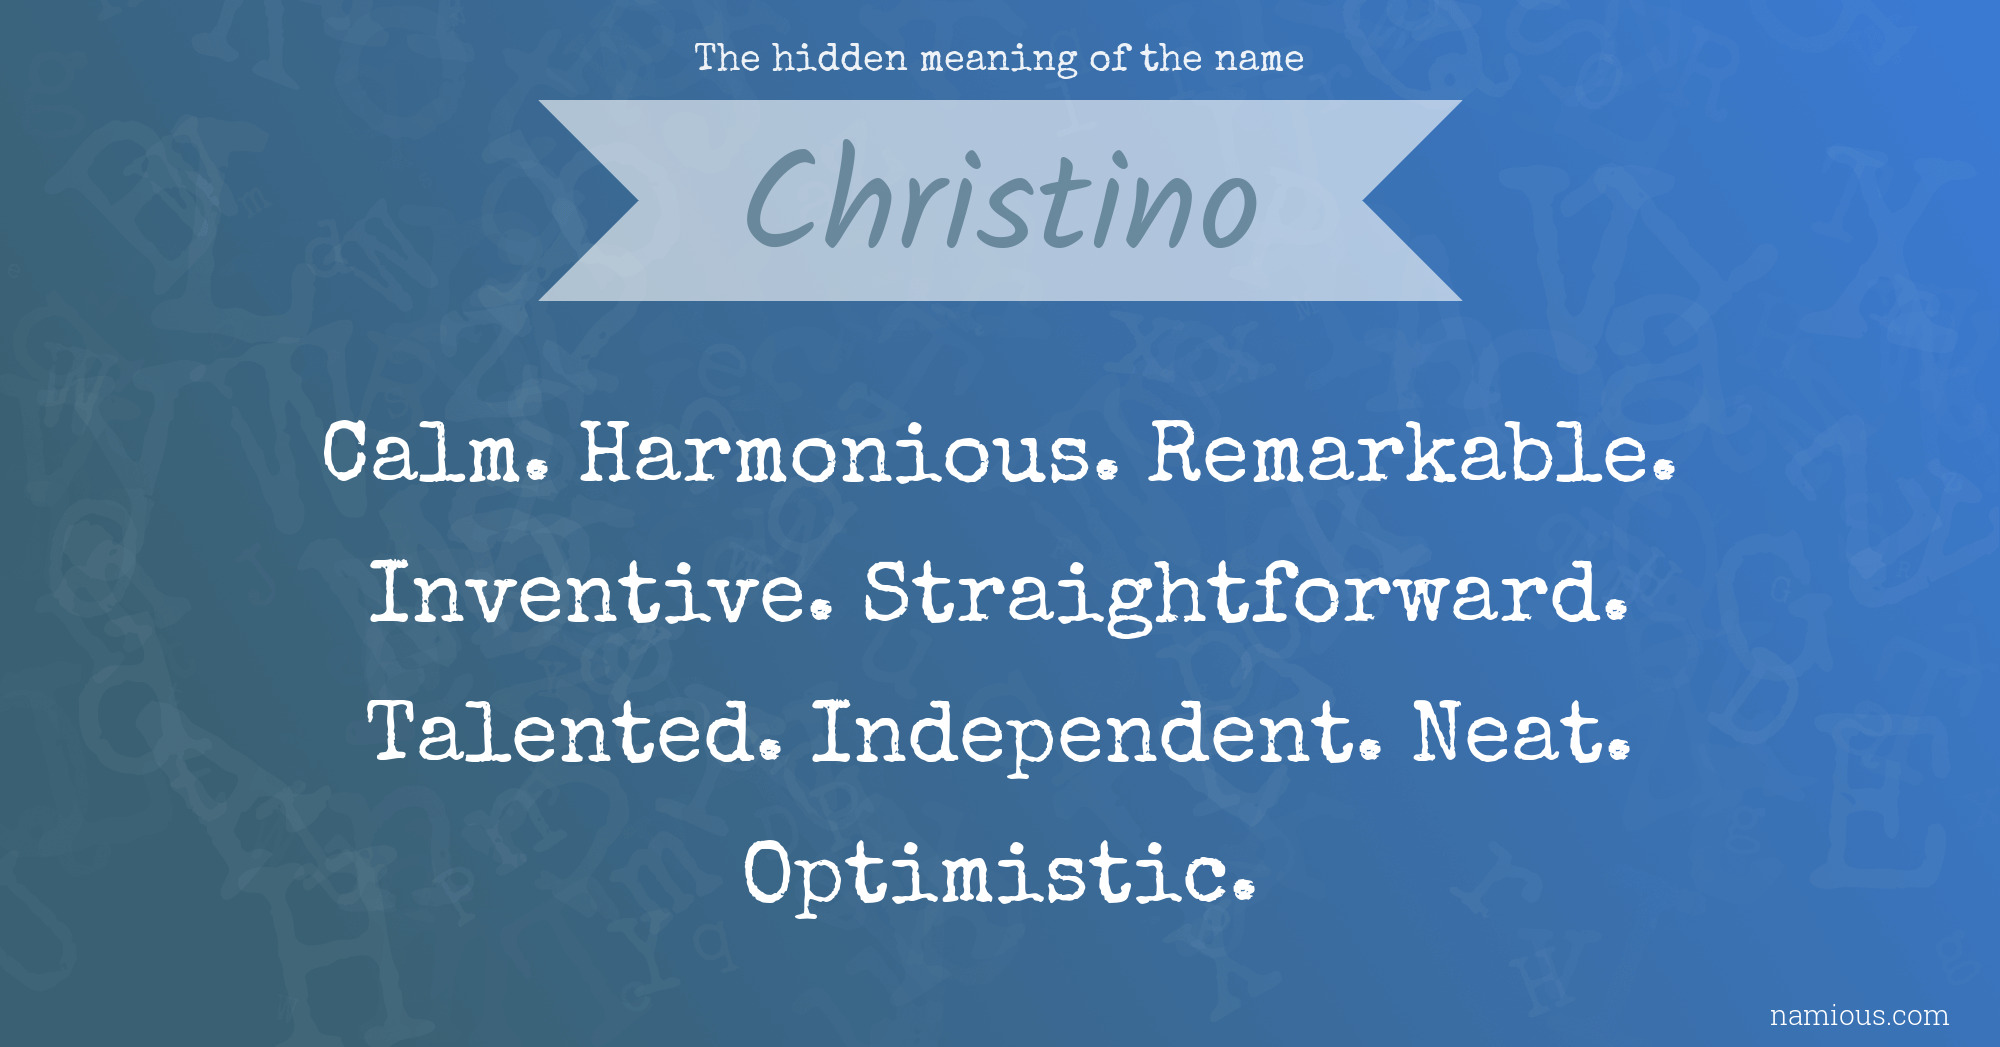 The hidden meaning of the name Christino